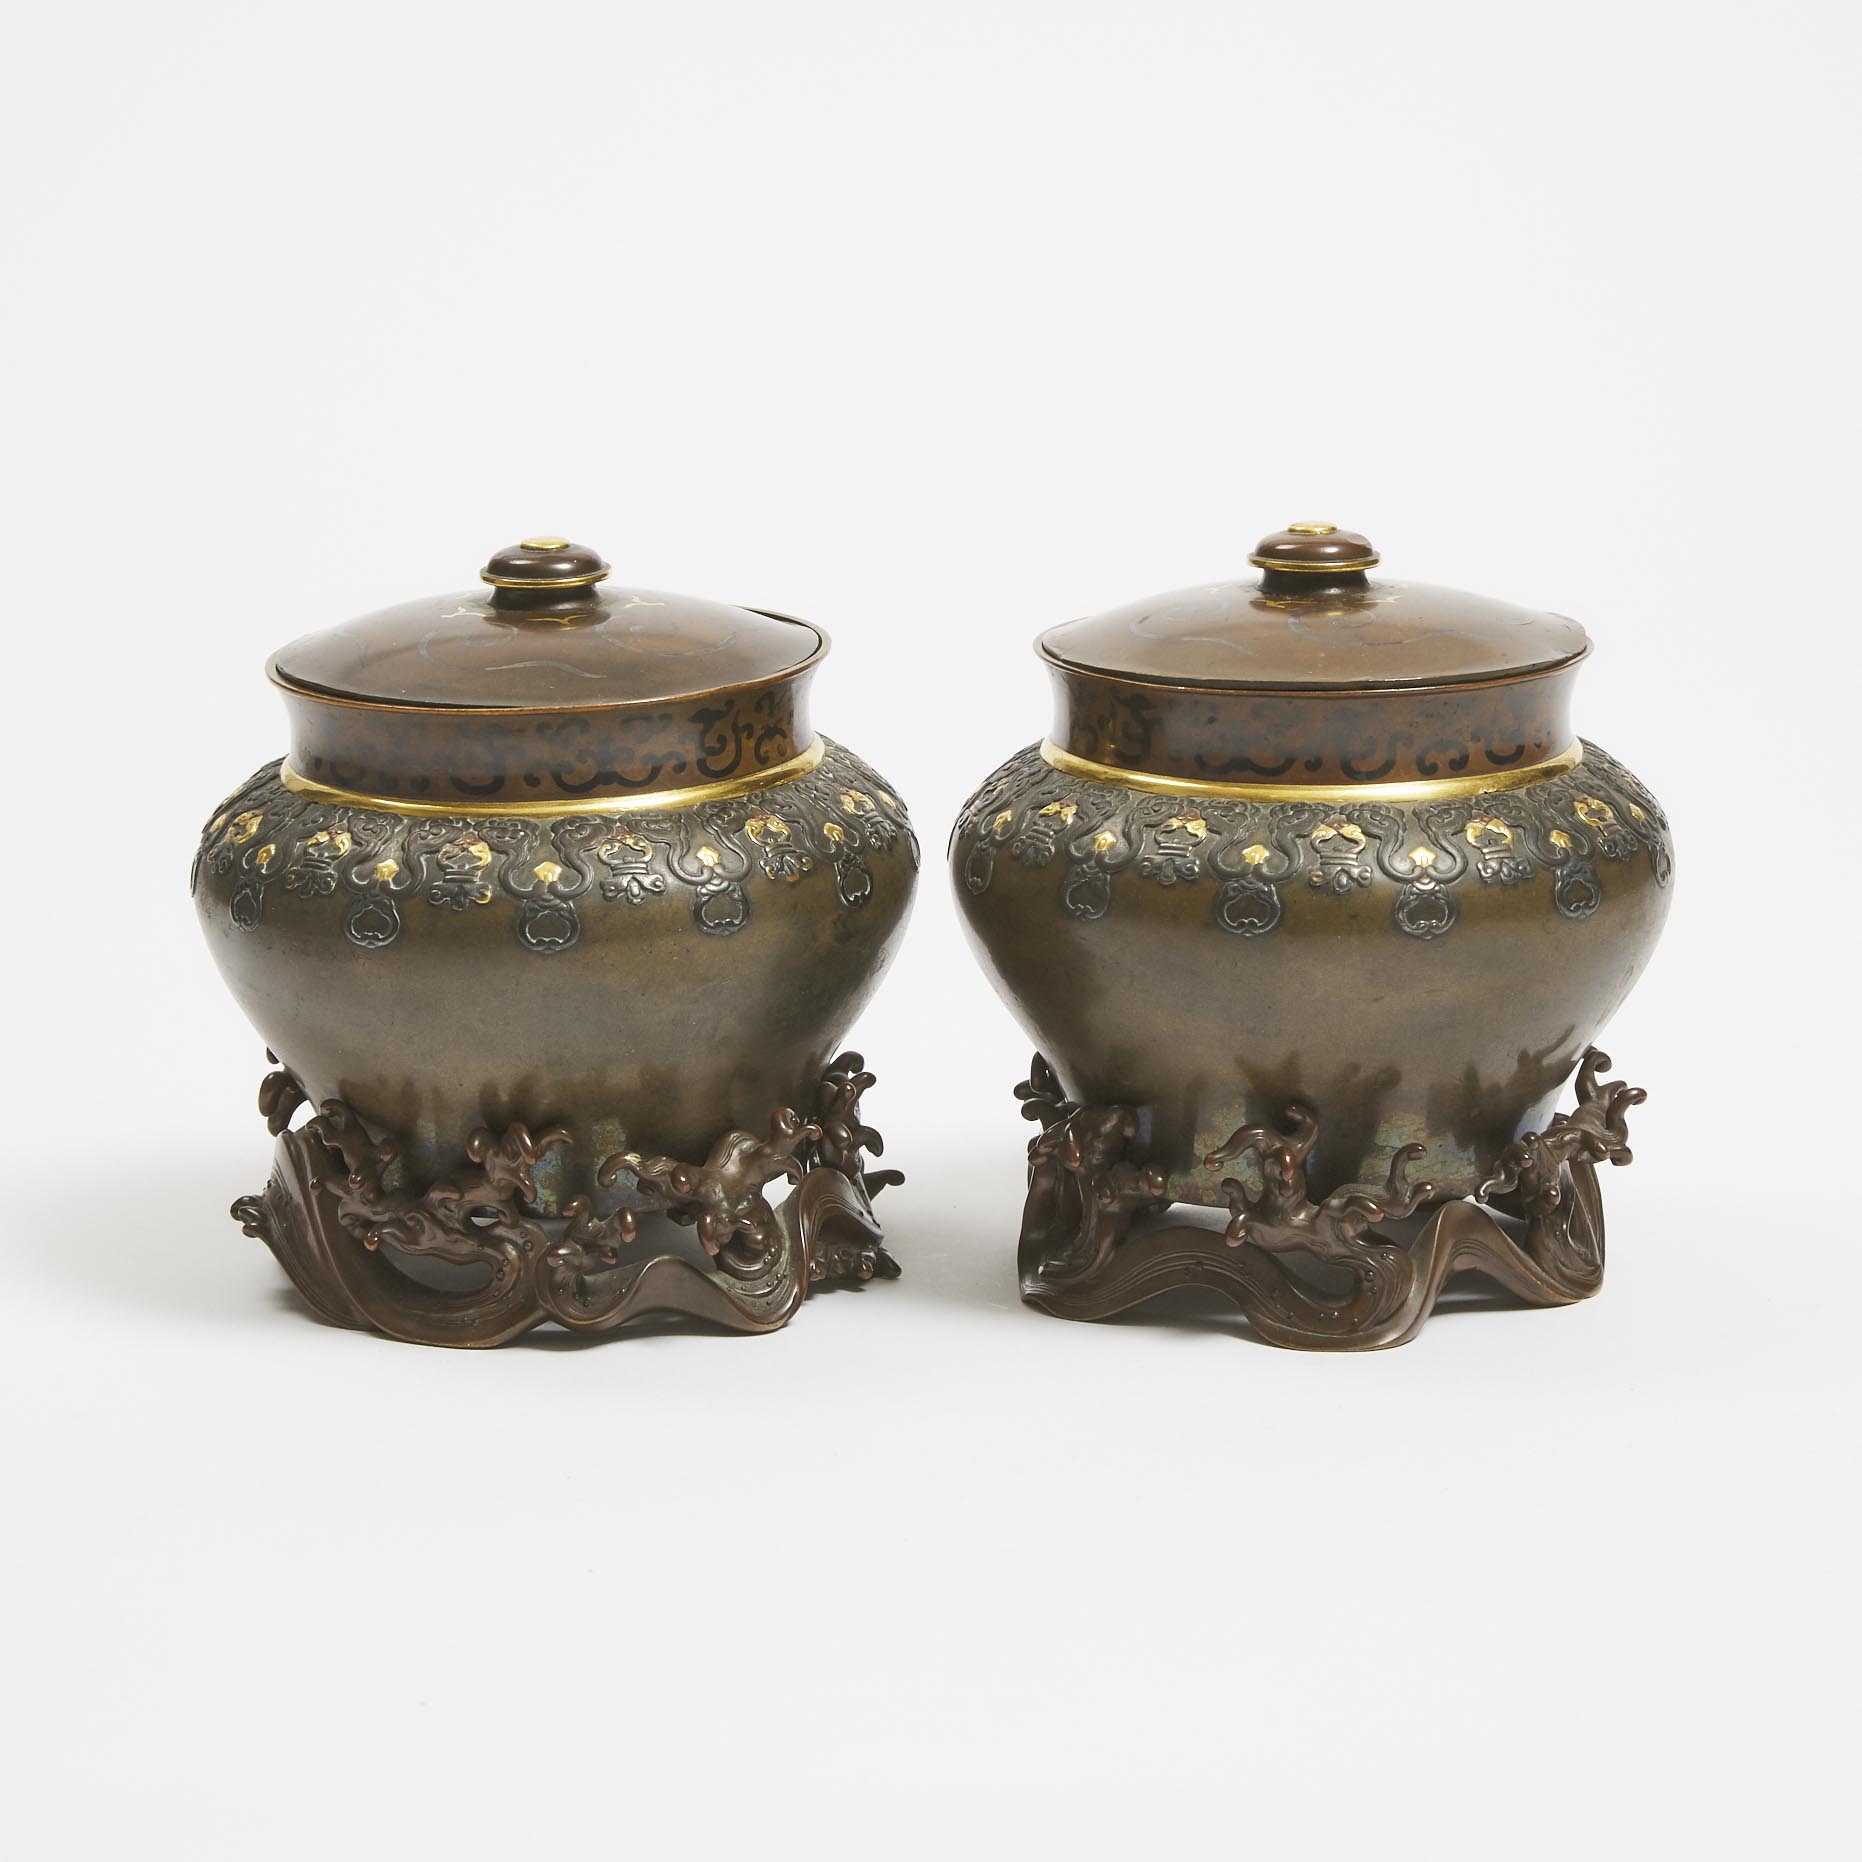 A Pair of Japanese Gilt and SIlver Inlaid Bronze Censers, Meiji Period, Early 20th Century